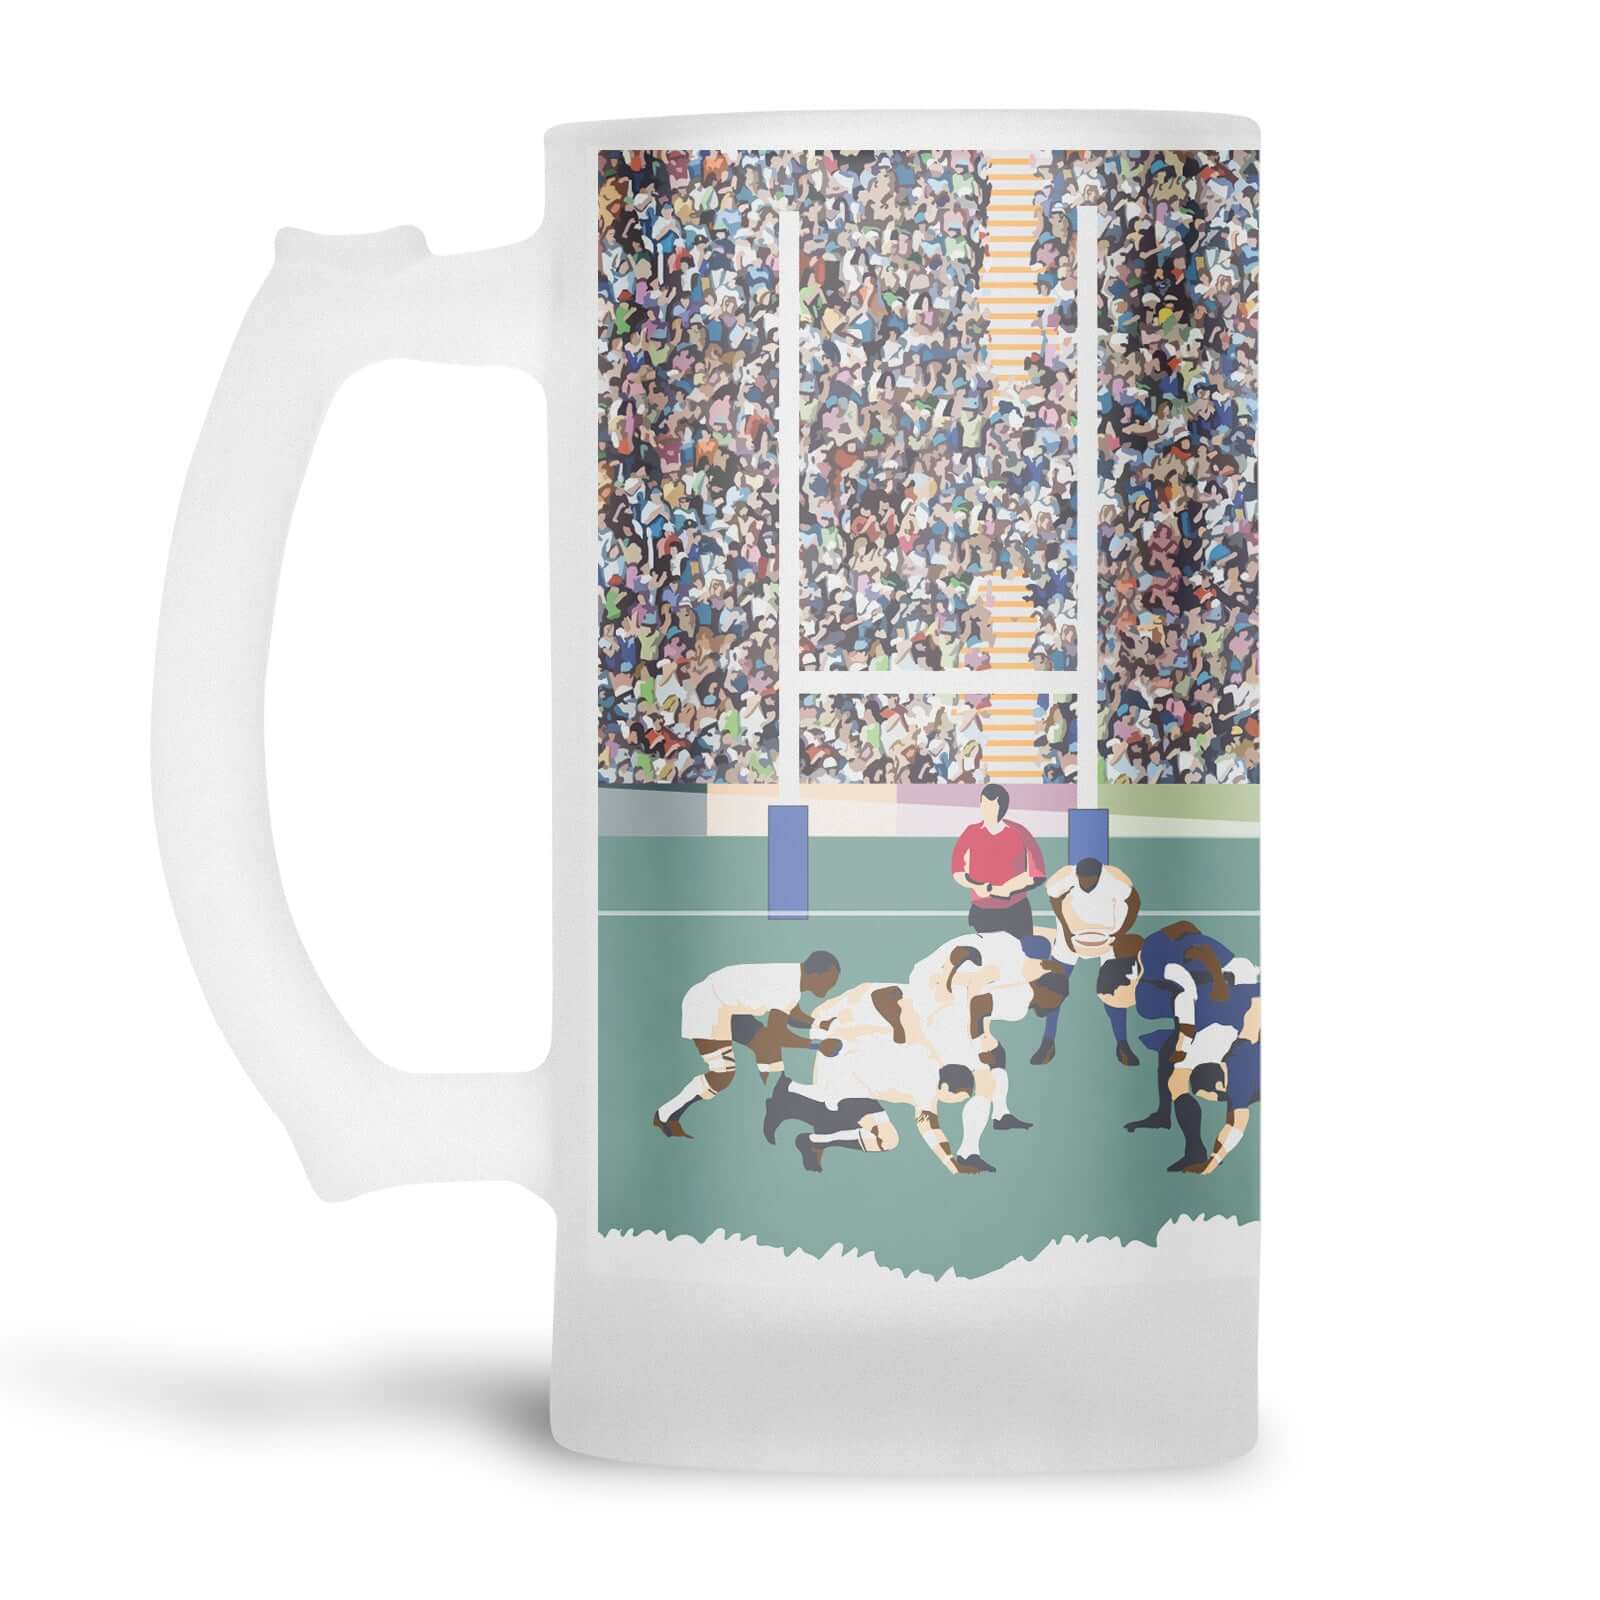 Rugby Scrum in front of goals on pitch with stadium printed on a fristed glass beer stein from Mustard and Gray